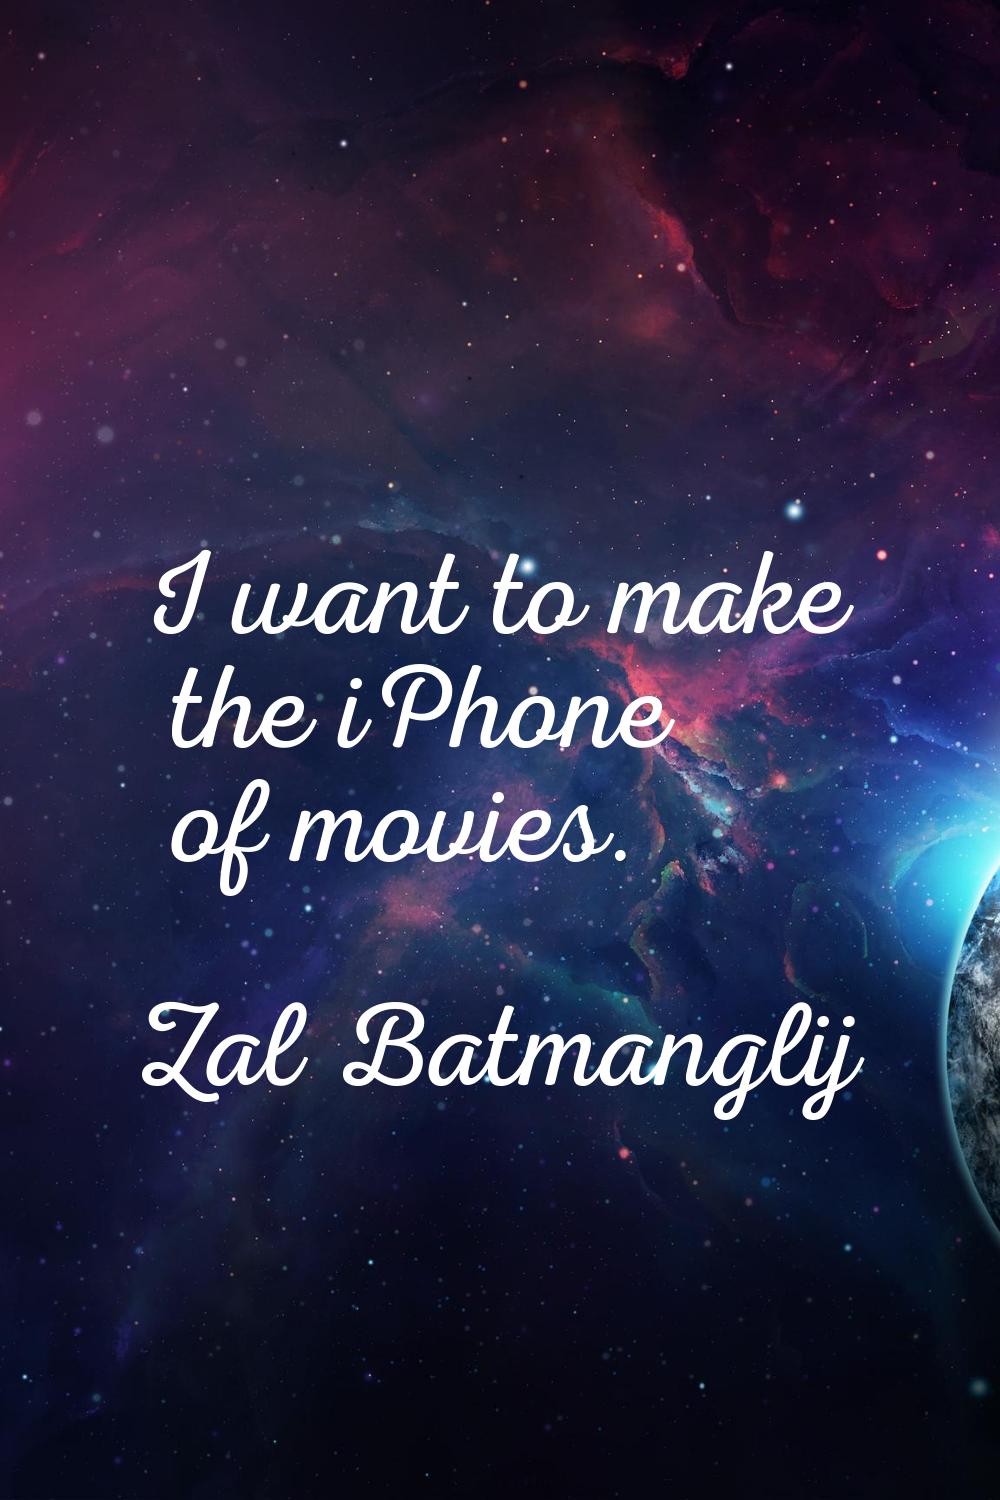 I want to make the iPhone of movies.